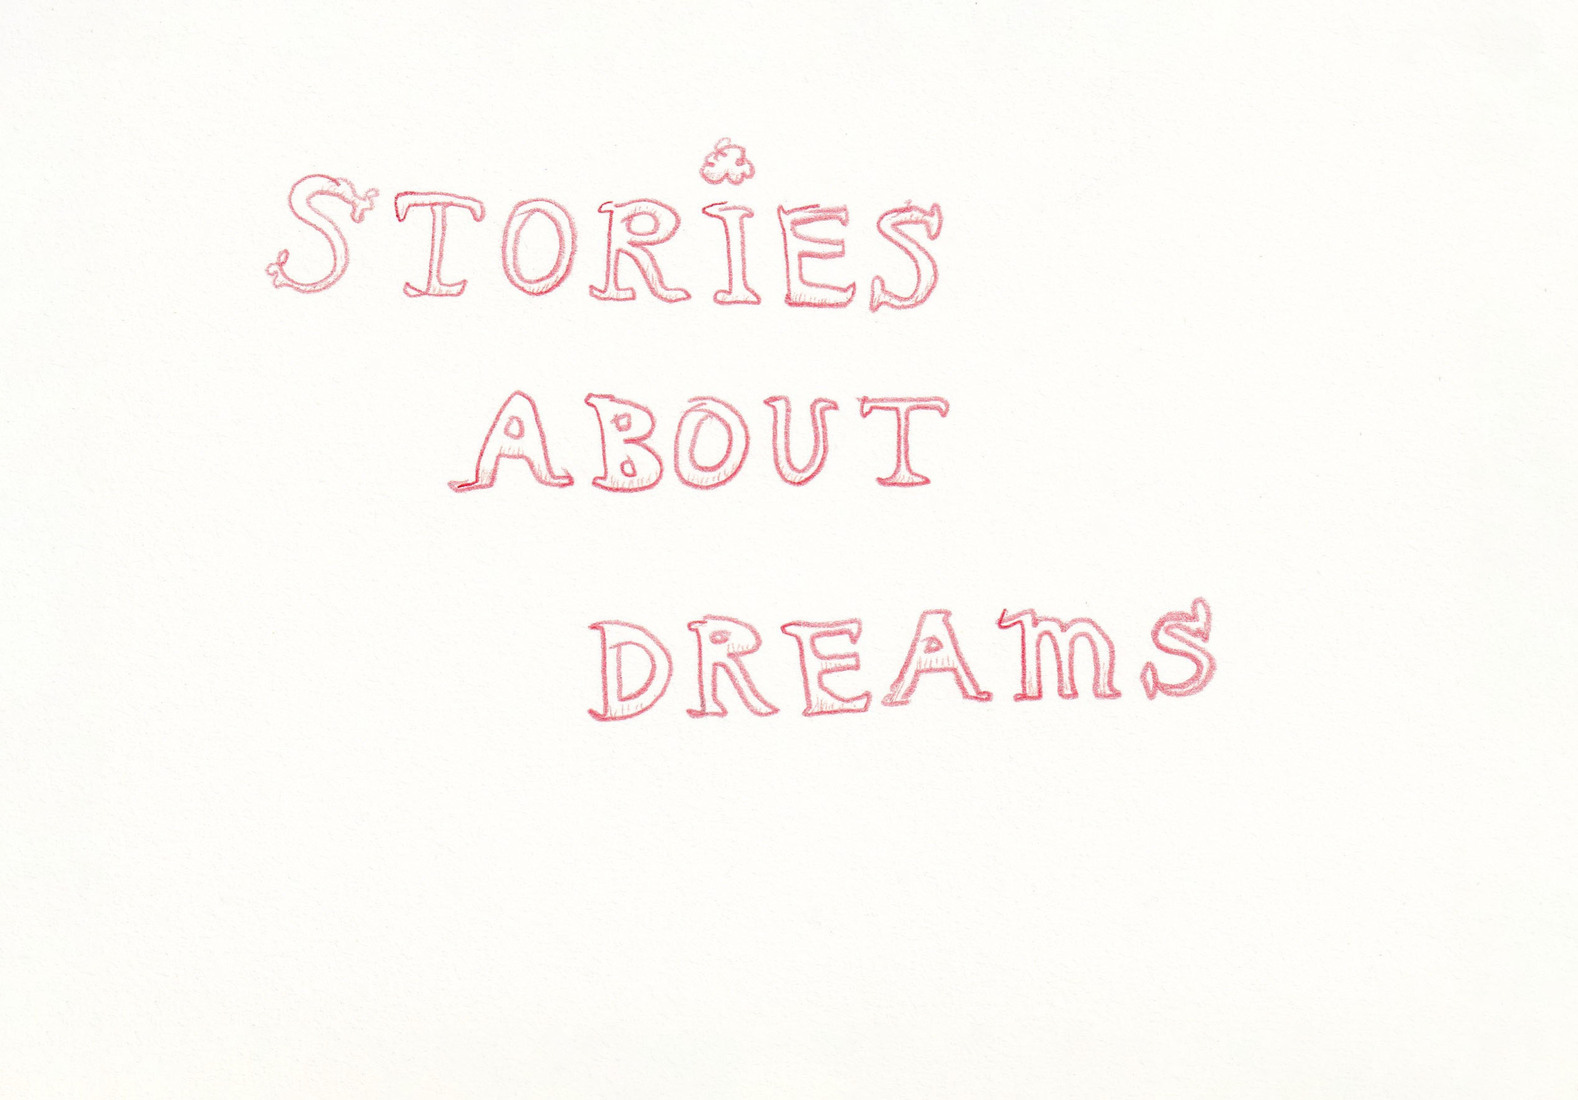 Stories about dreams